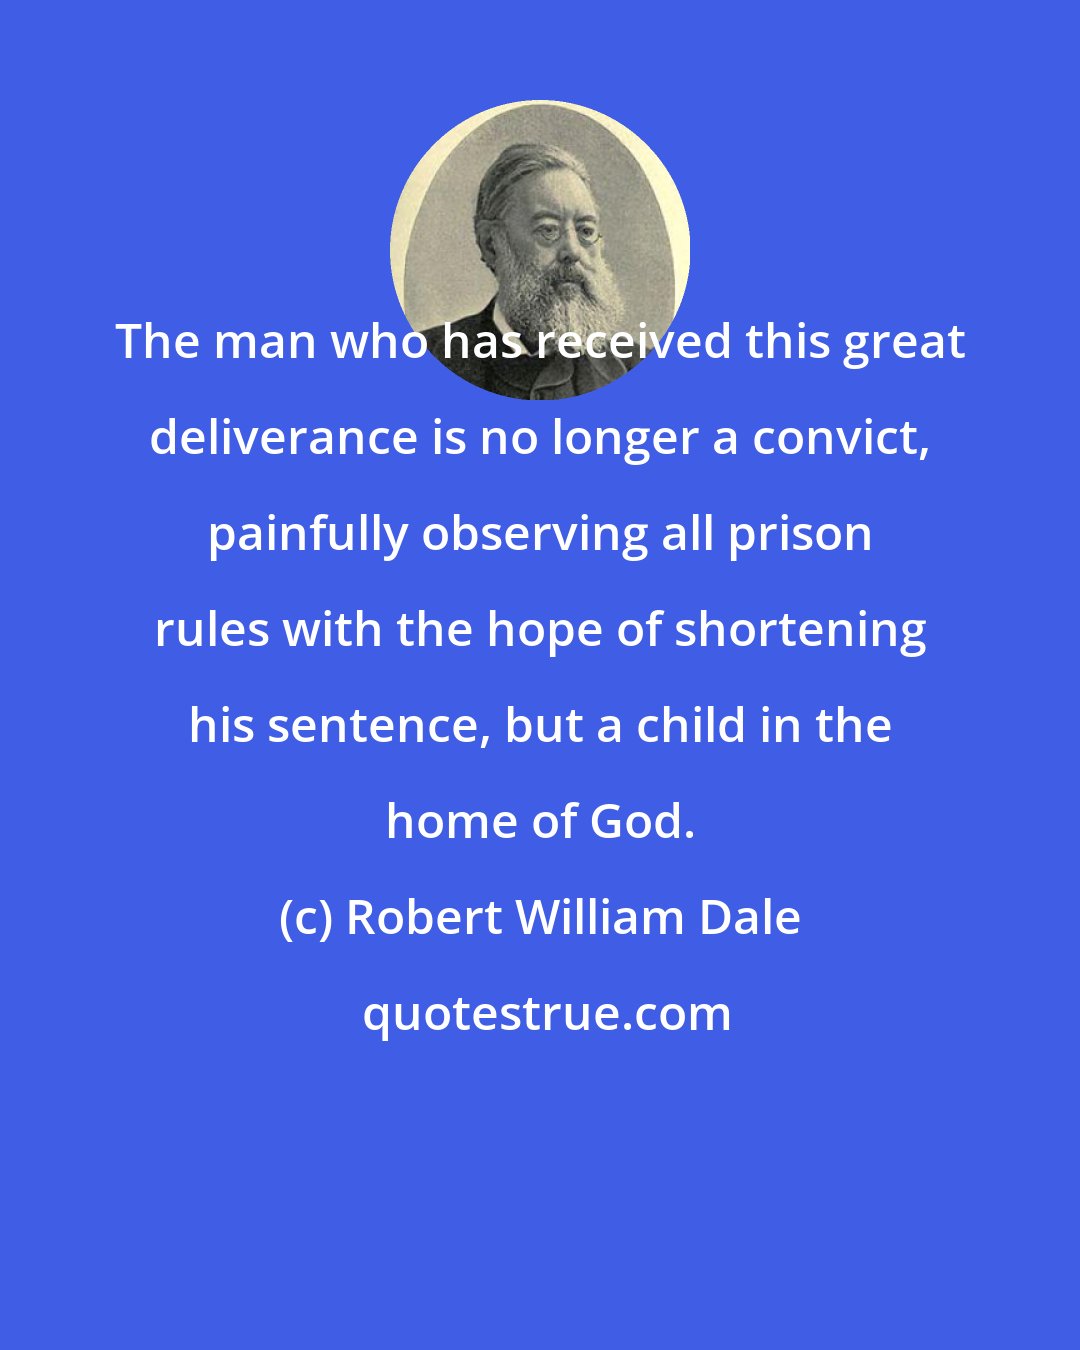 Robert William Dale: The man who has received this great deliverance is no longer a convict, painfully observing all prison rules with the hope of shortening his sentence, but a child in the home of God.